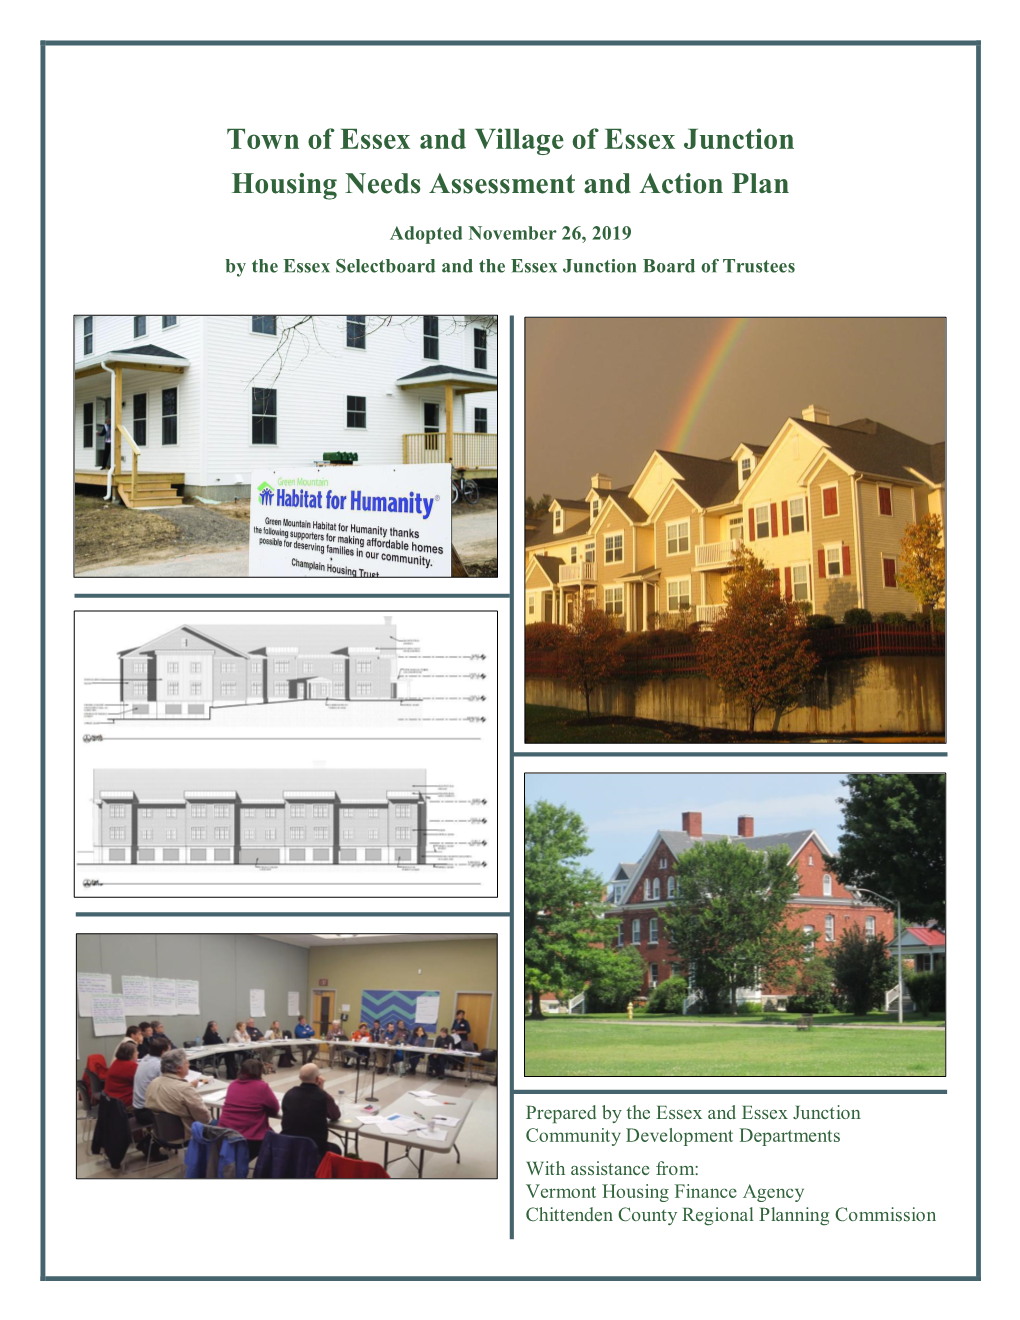 Essex Housing Needs Assessment and Action Plan